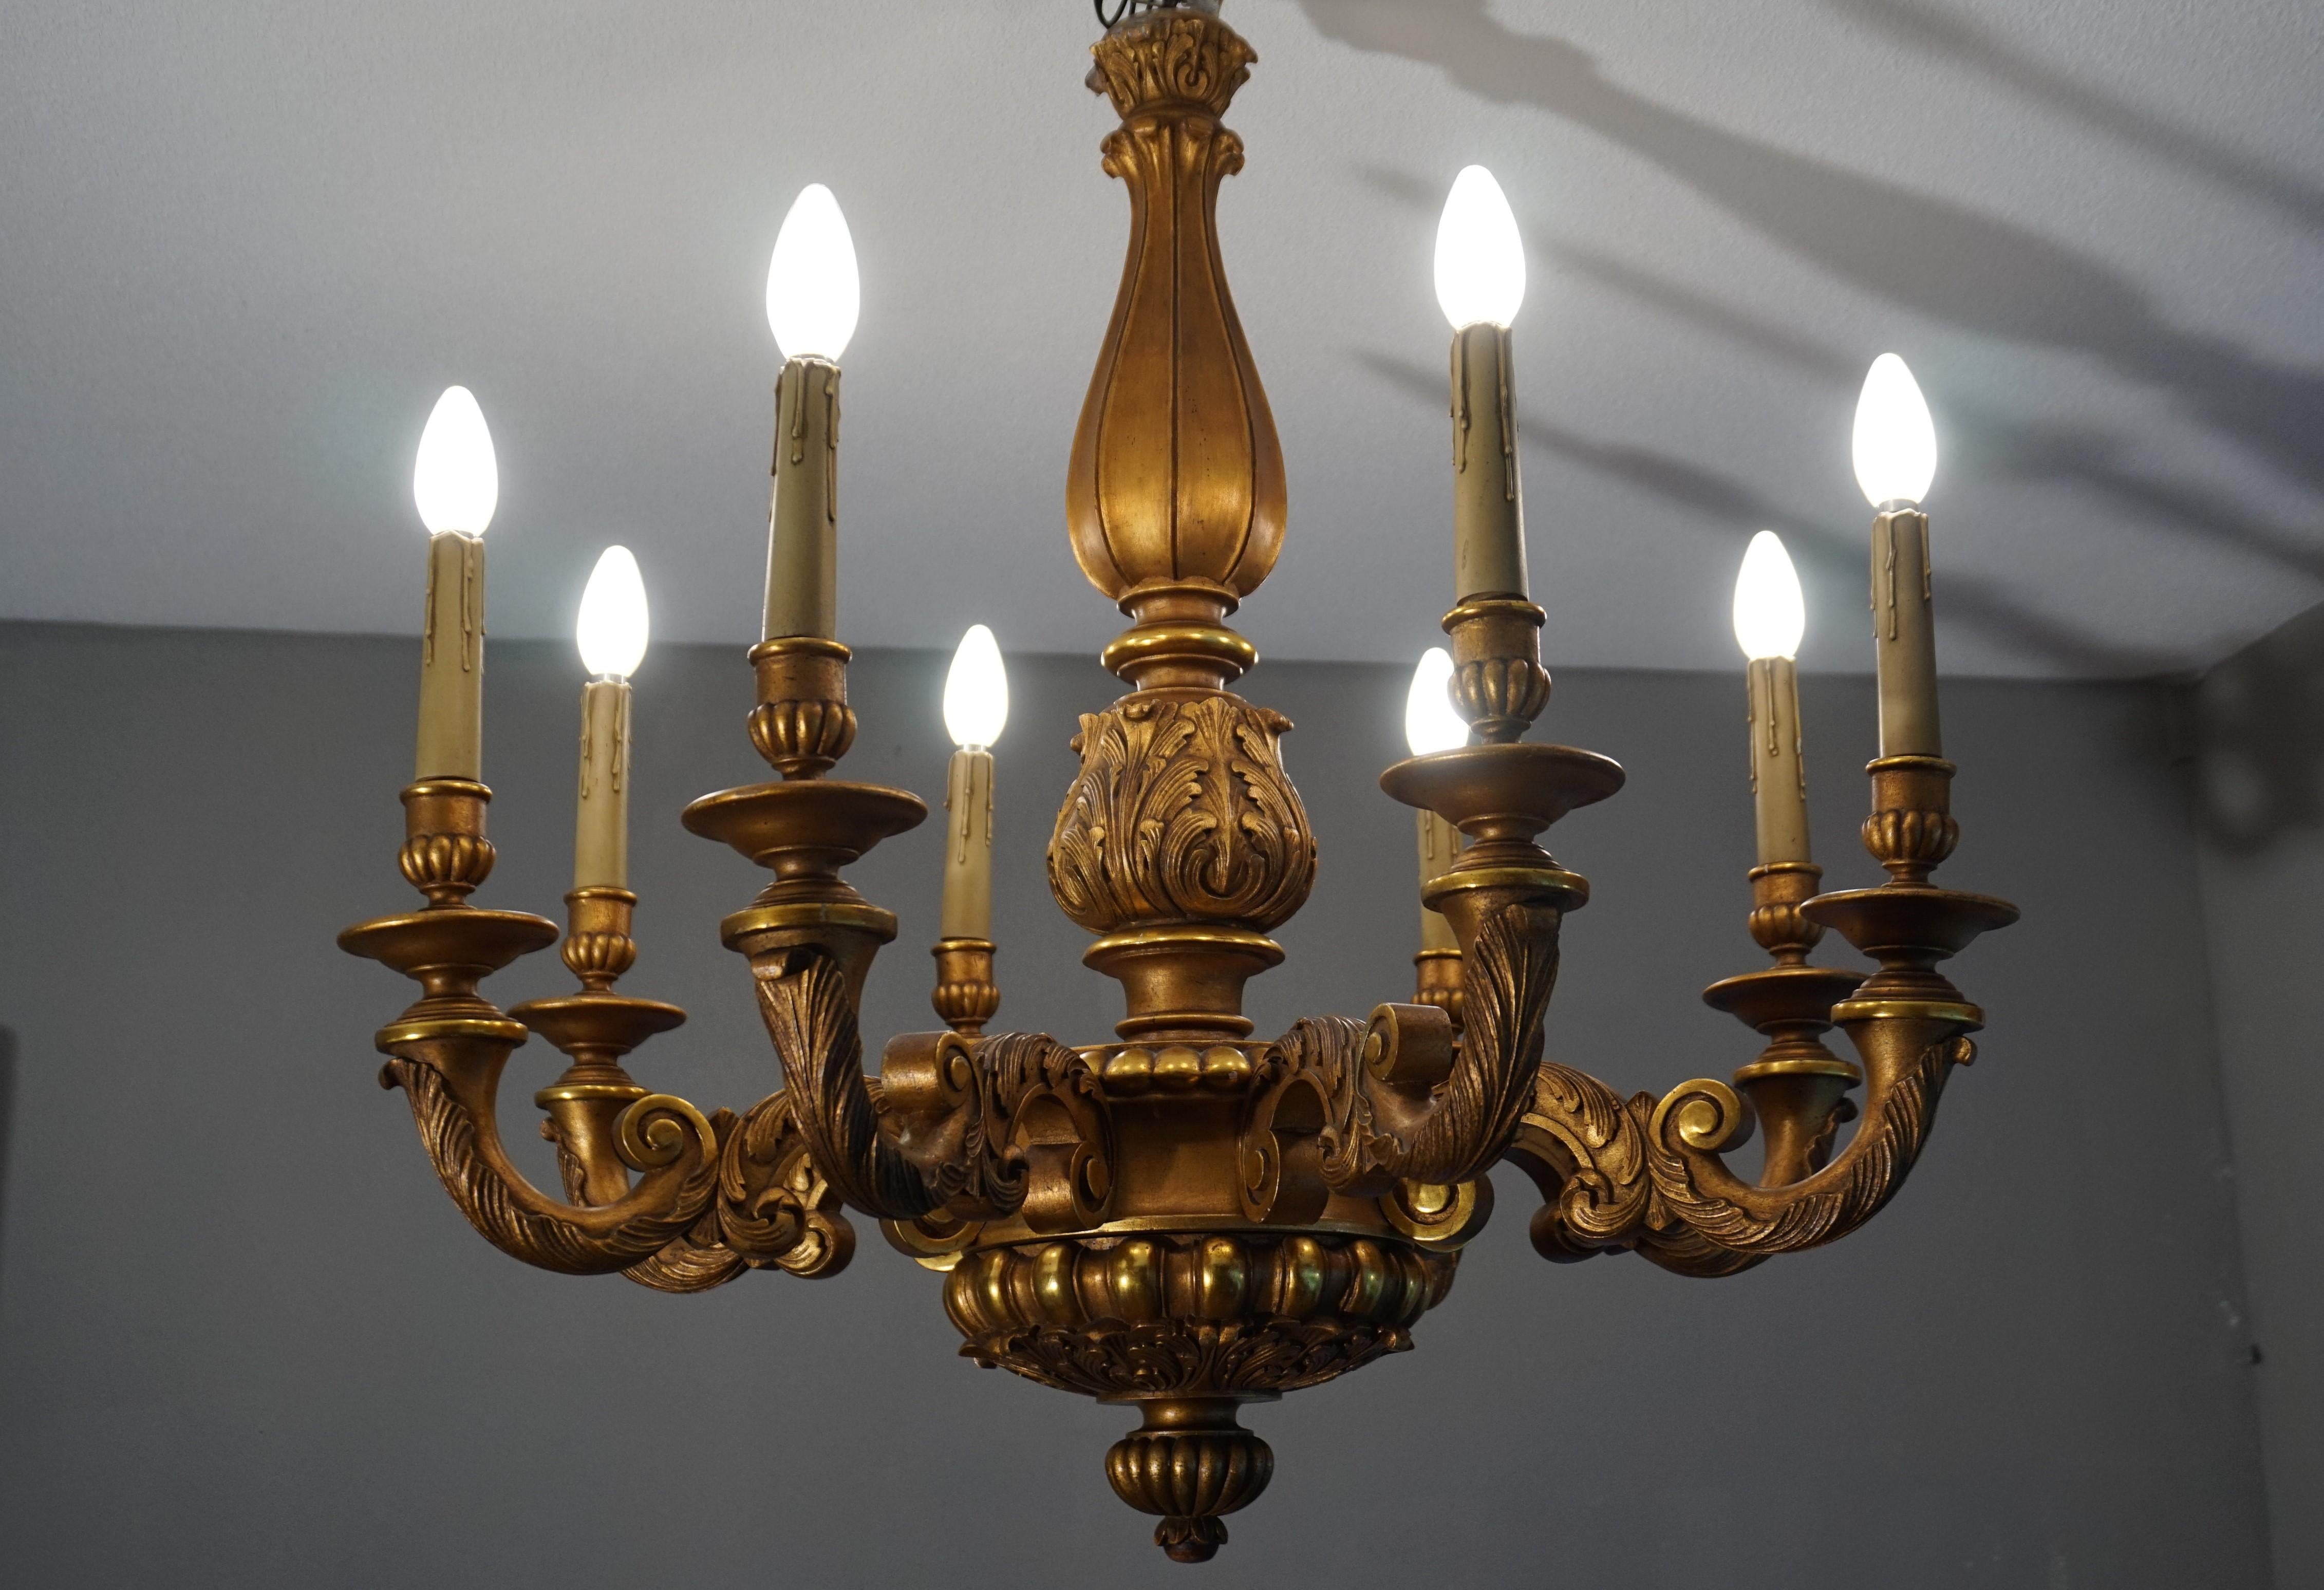 Great quality and excellent condition, golden light fixture.

All handcrafted in early 20th century Europe this chandelier was created with skills that are almost impossible to find in this day and age. The classical and timeless design, the quality